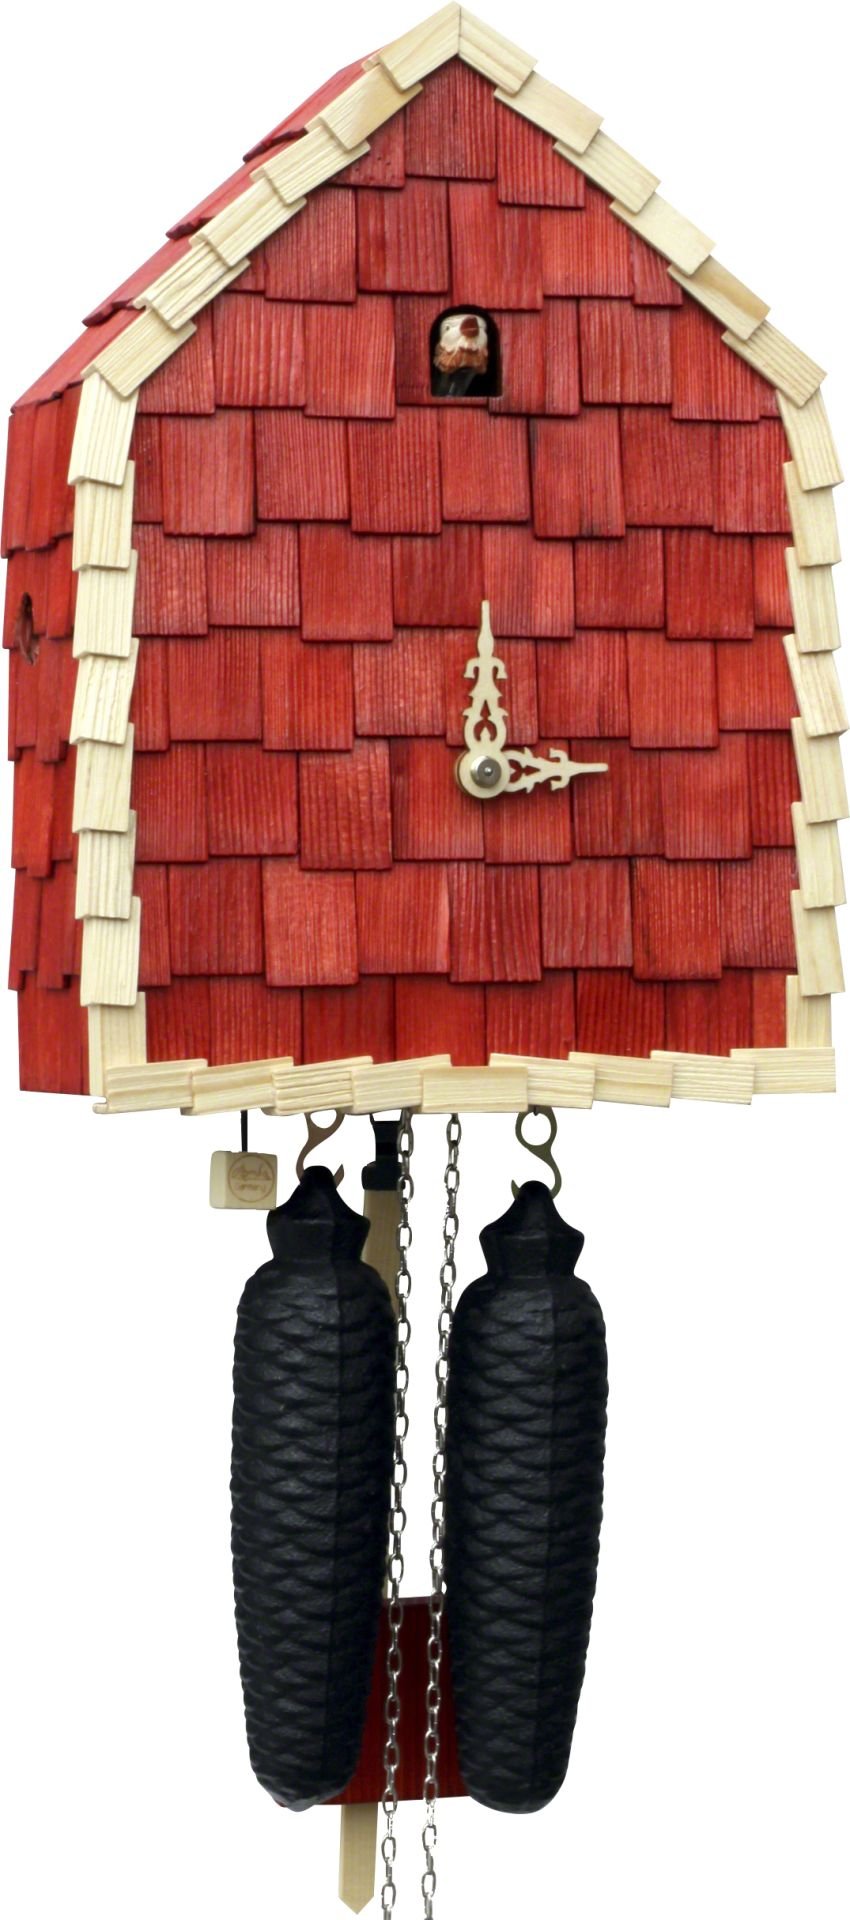 Cuckoo Clock Modern Art Style 8 Day Movement 29cm by Rombach & Haas